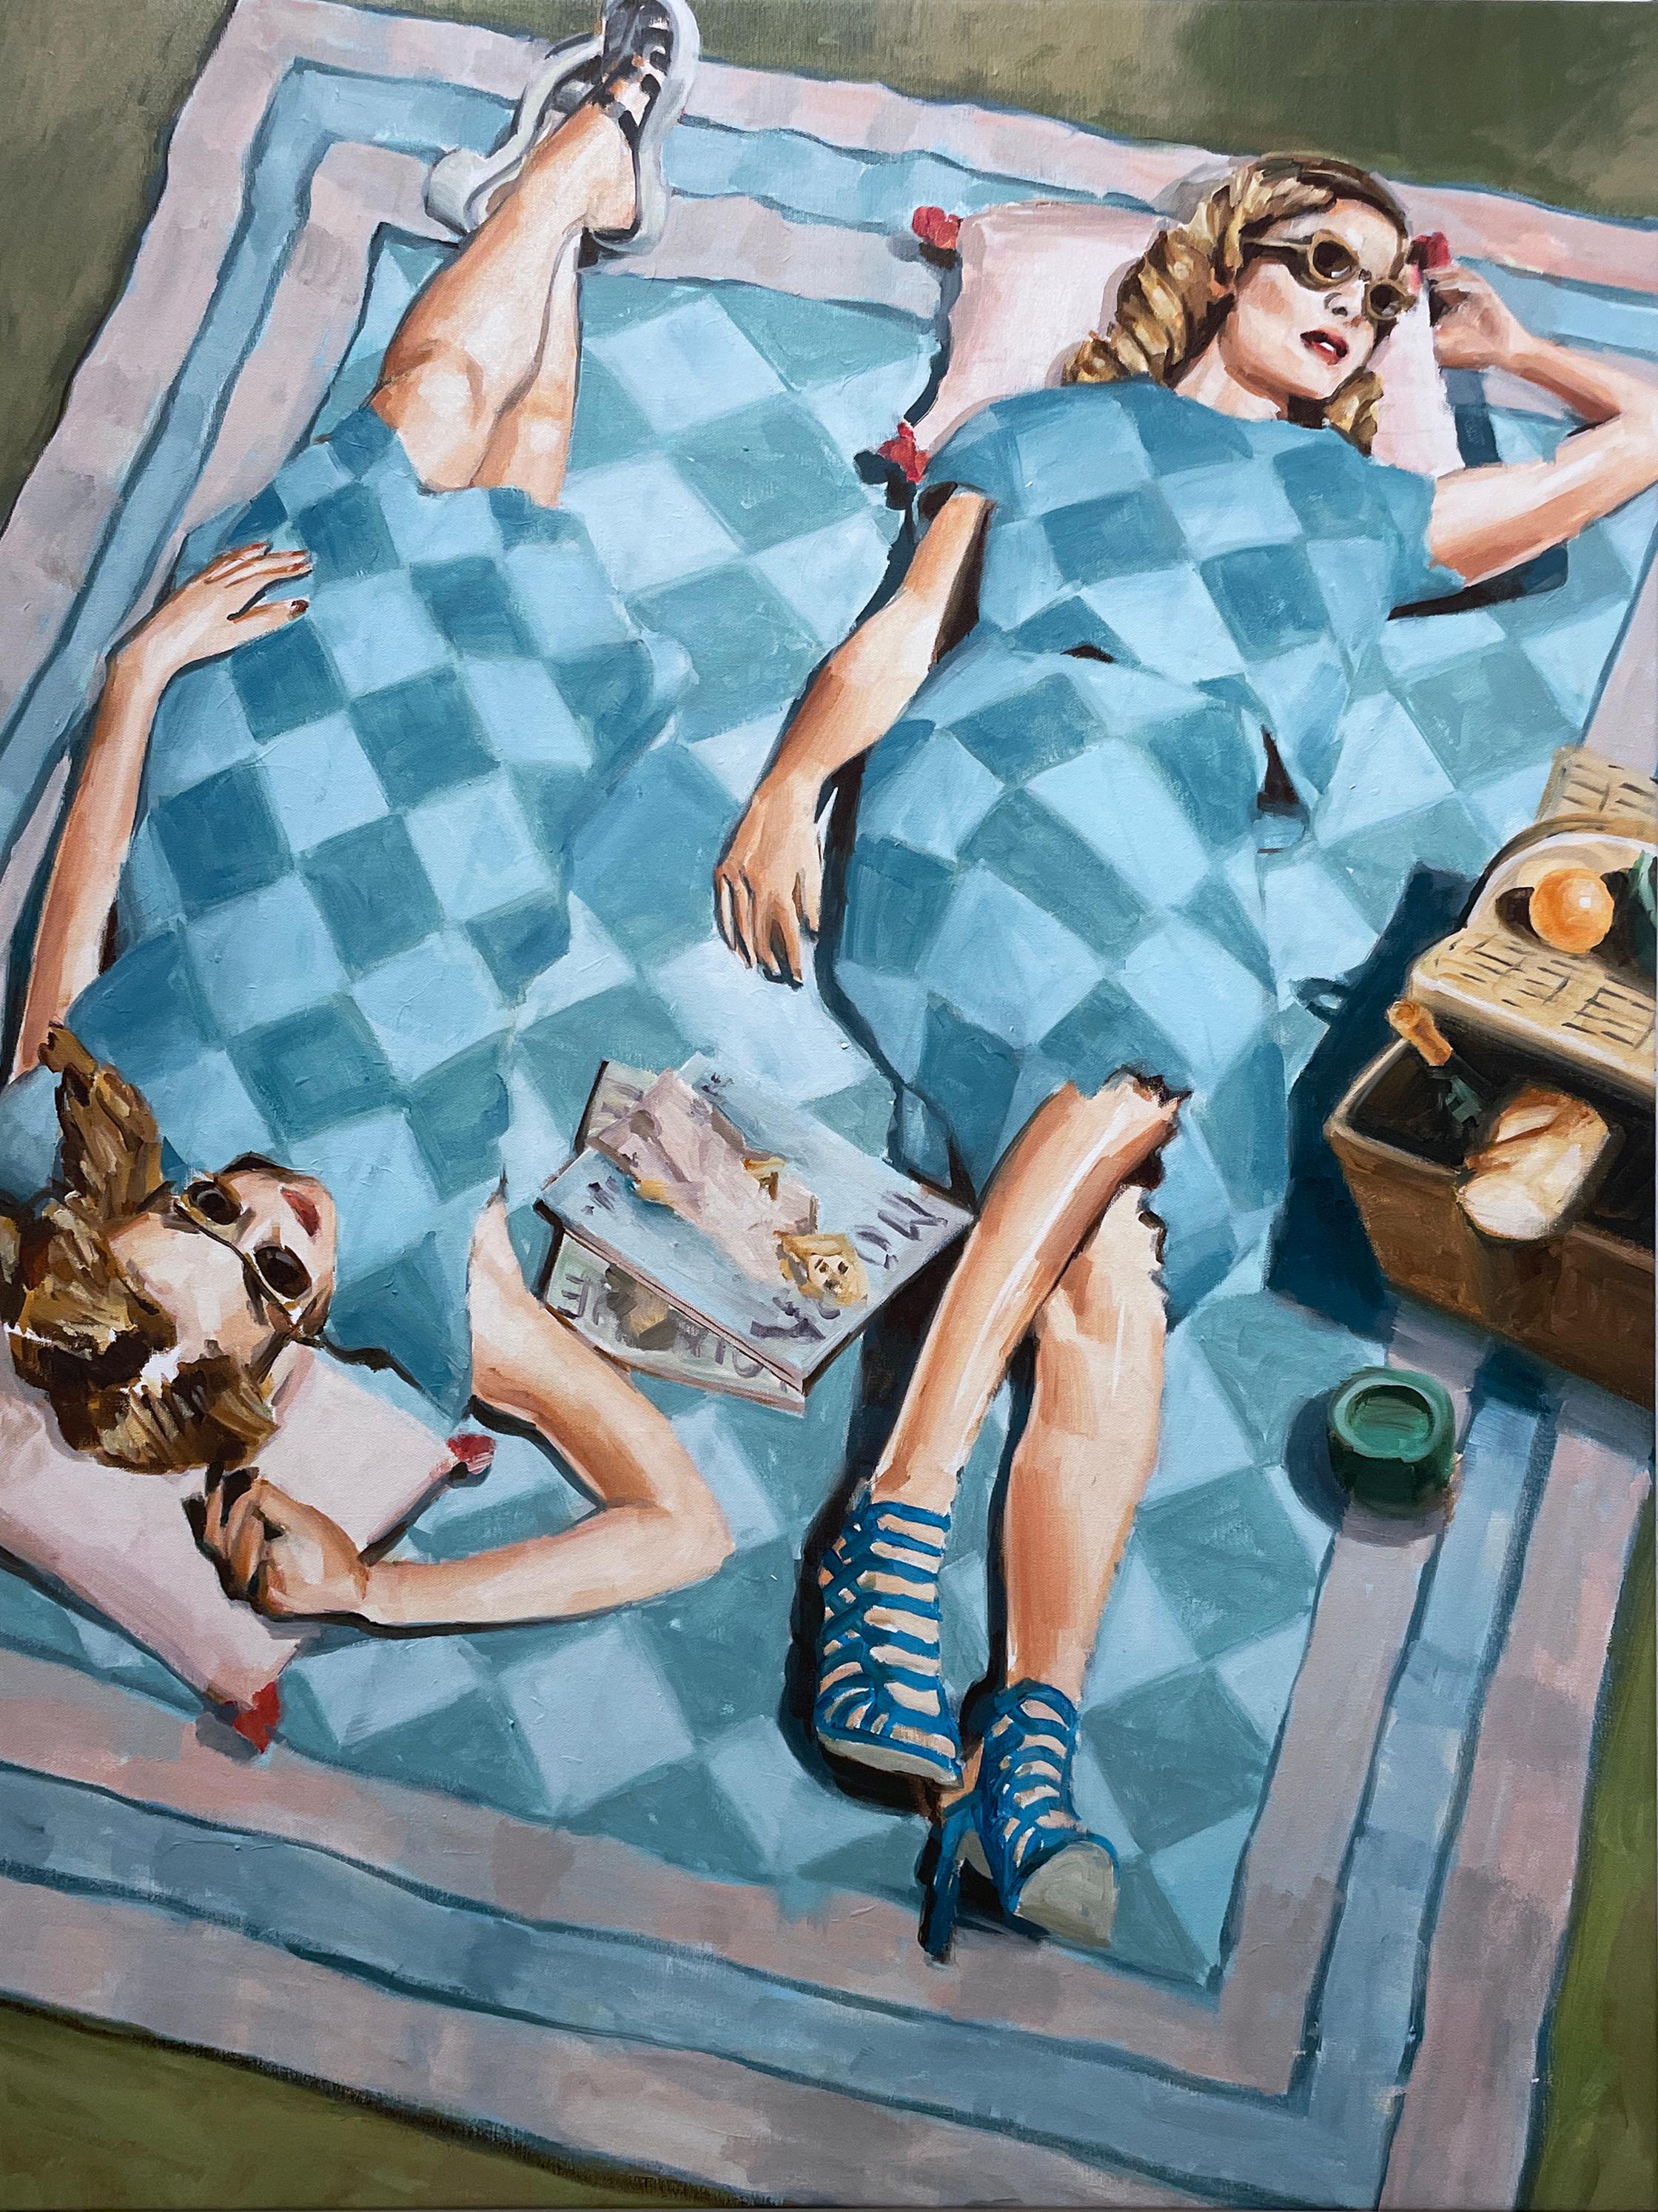 RU8ICON1 Portrait Painting - Style Picnic (2022) oil on canvas, figurative, lounging women, patterns, blue